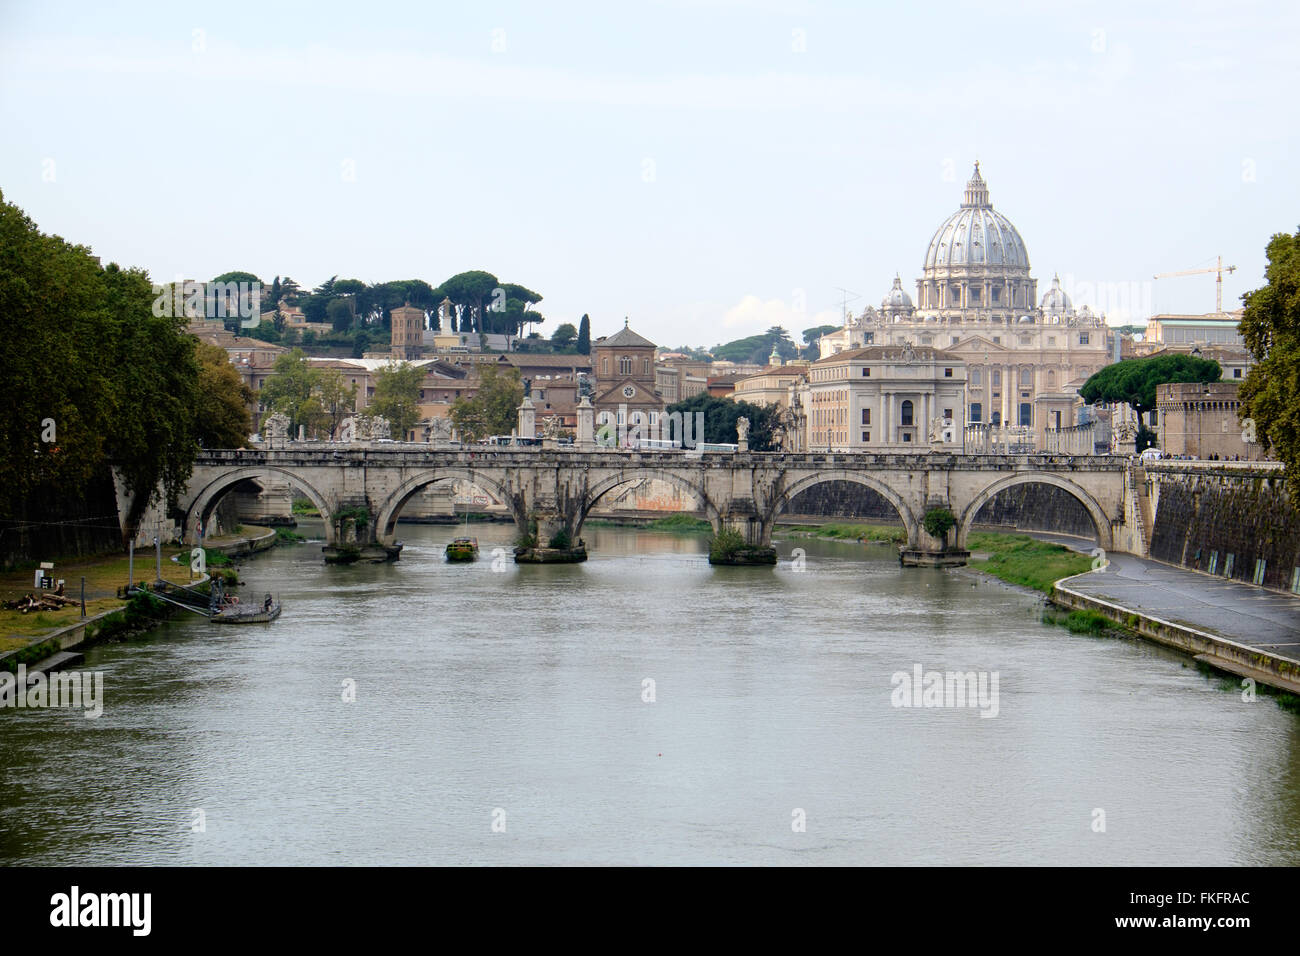 St. Peter's Basilica is seen above the Tiber River and the Ponte Sant' Angelo bridge in Rome, Italy. Stock Photo